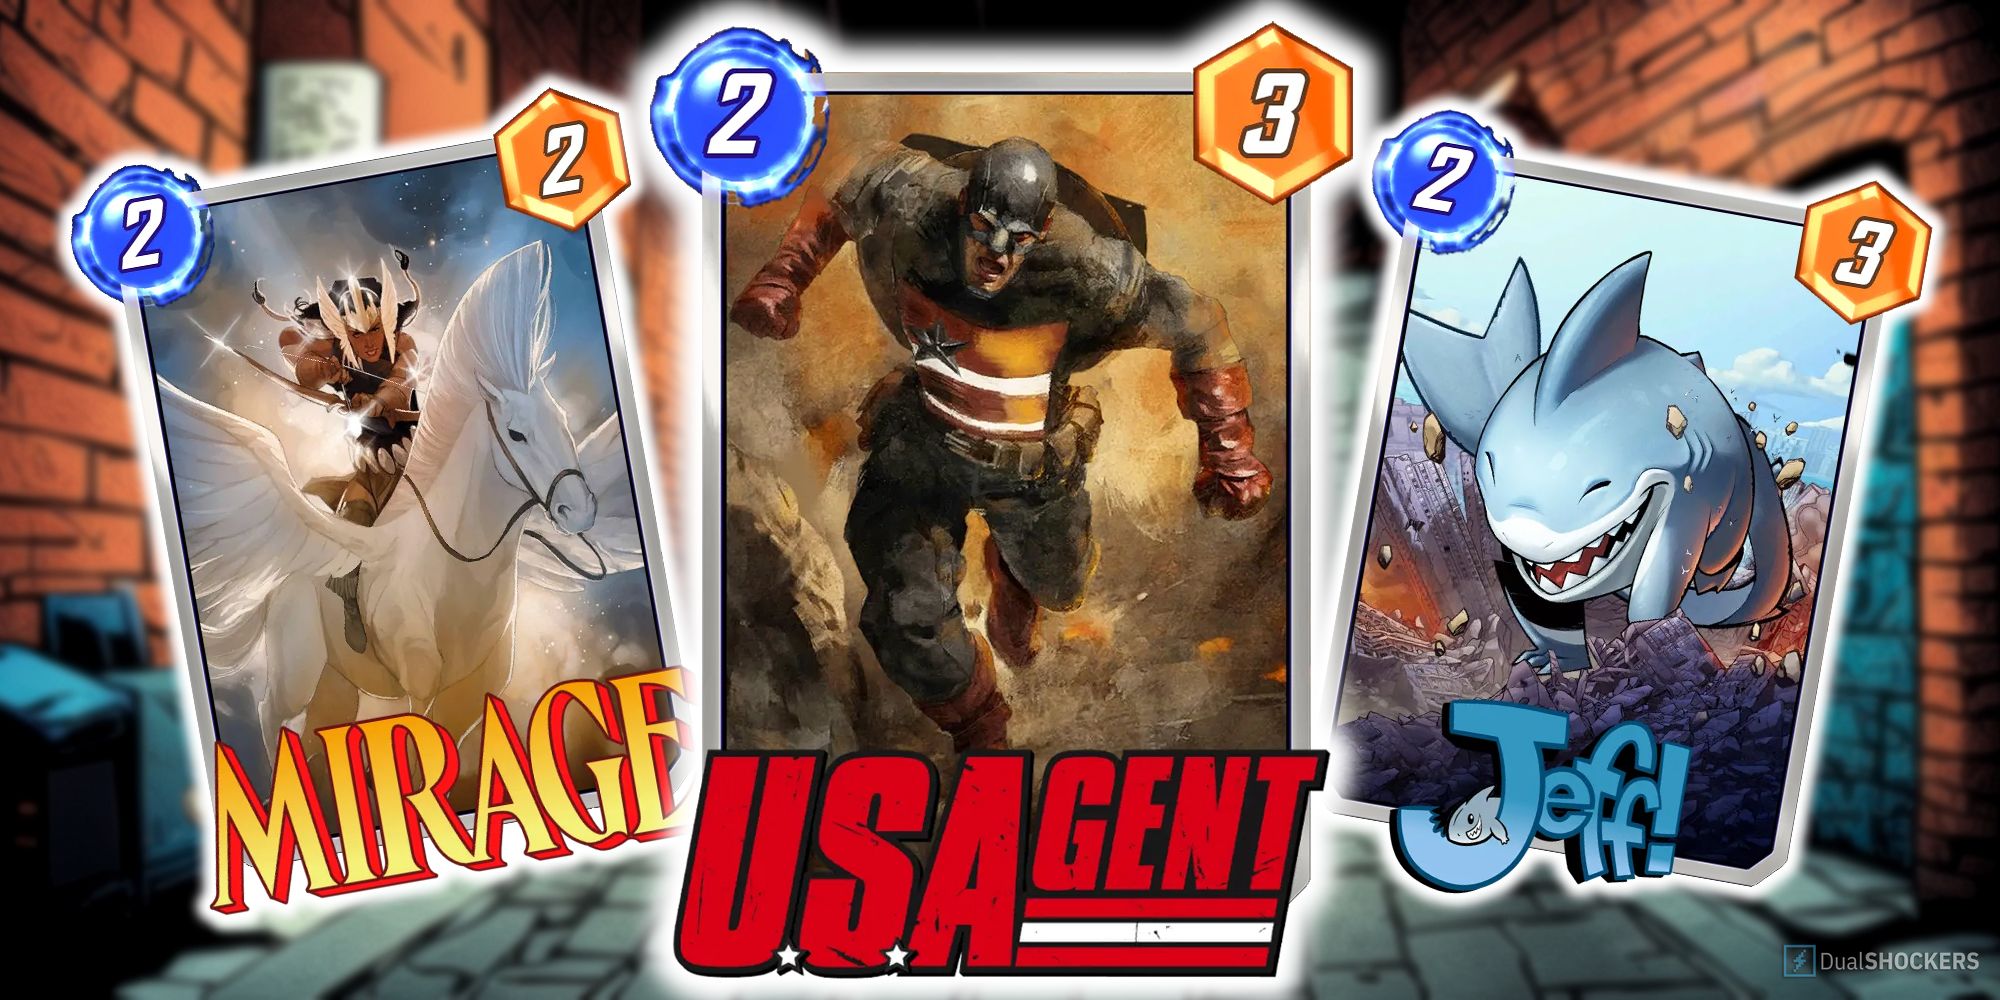 Marvel Snap's U.S. Agent card surrounded by Mirage and Jeff variants.